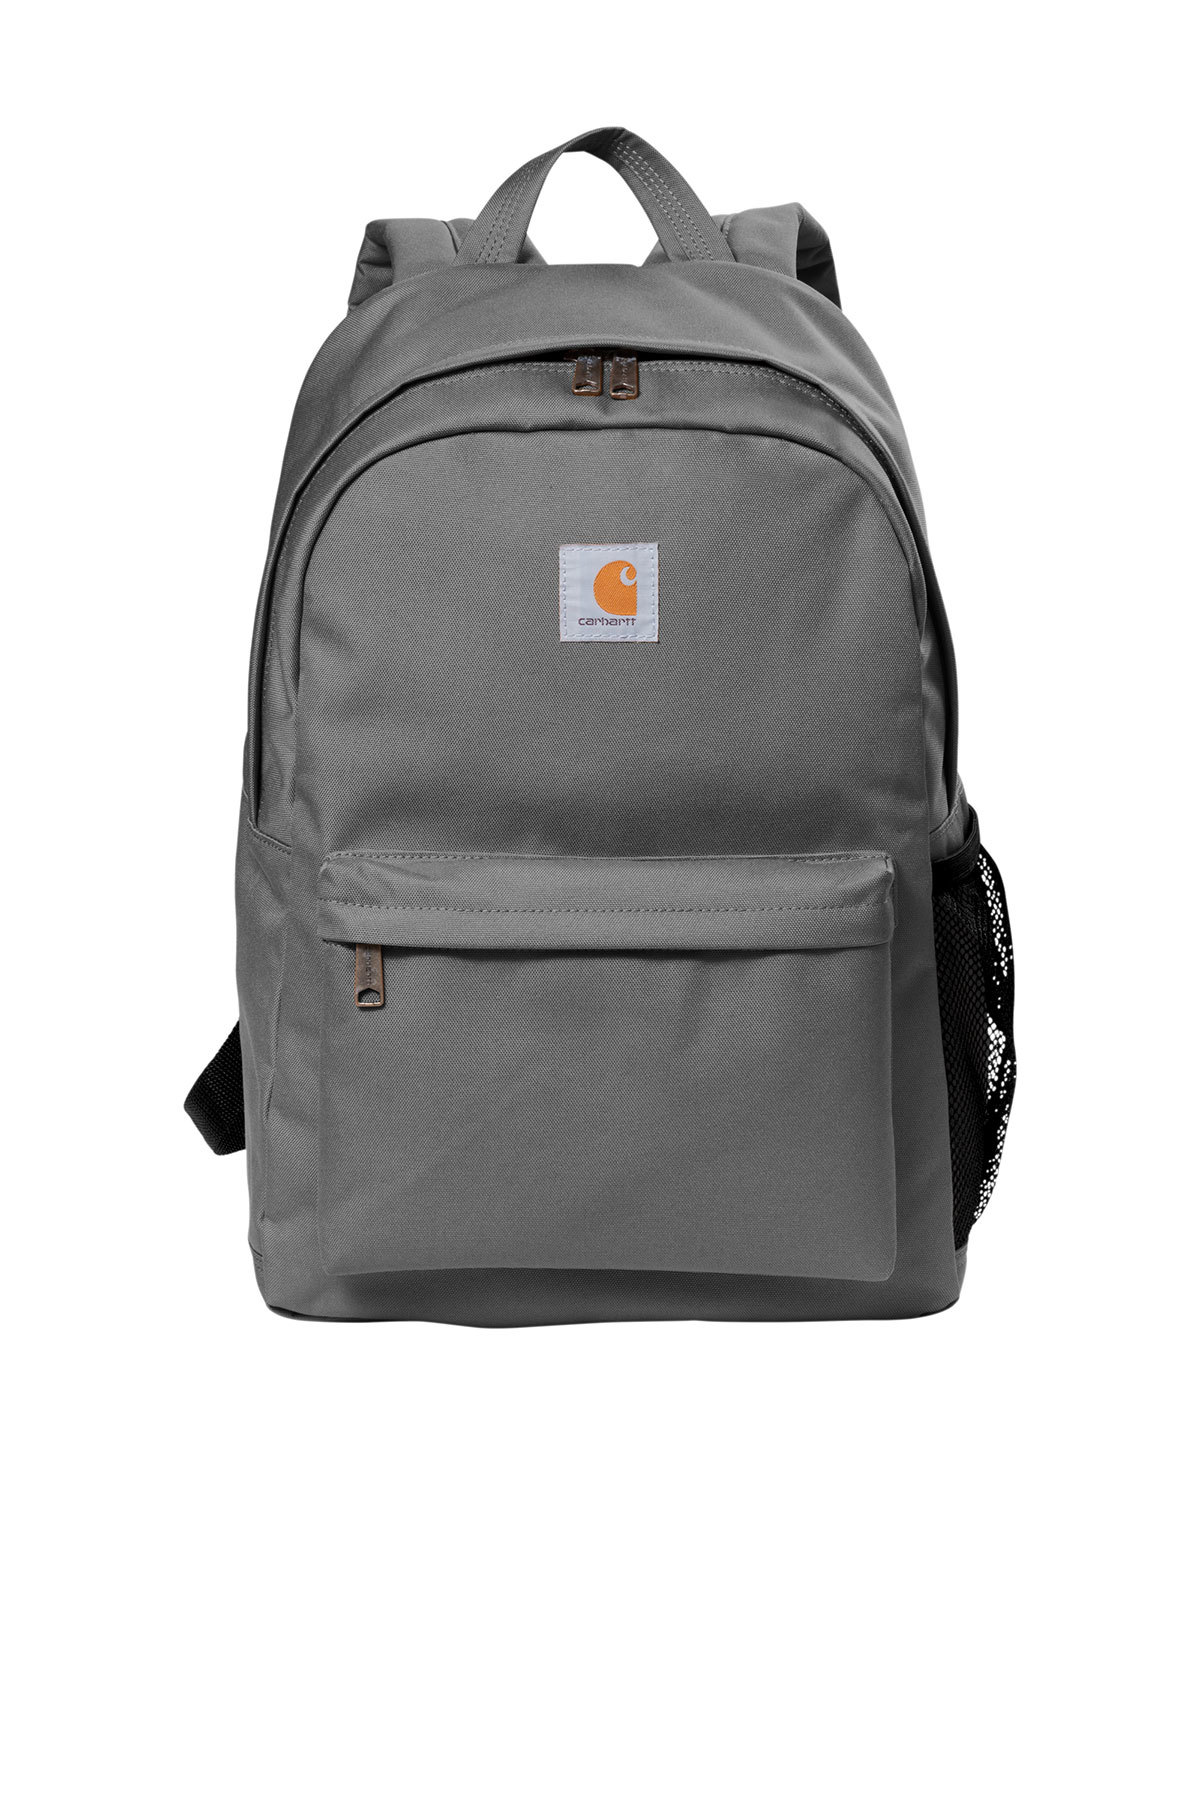 Carhartt Canvas Backpack, Product